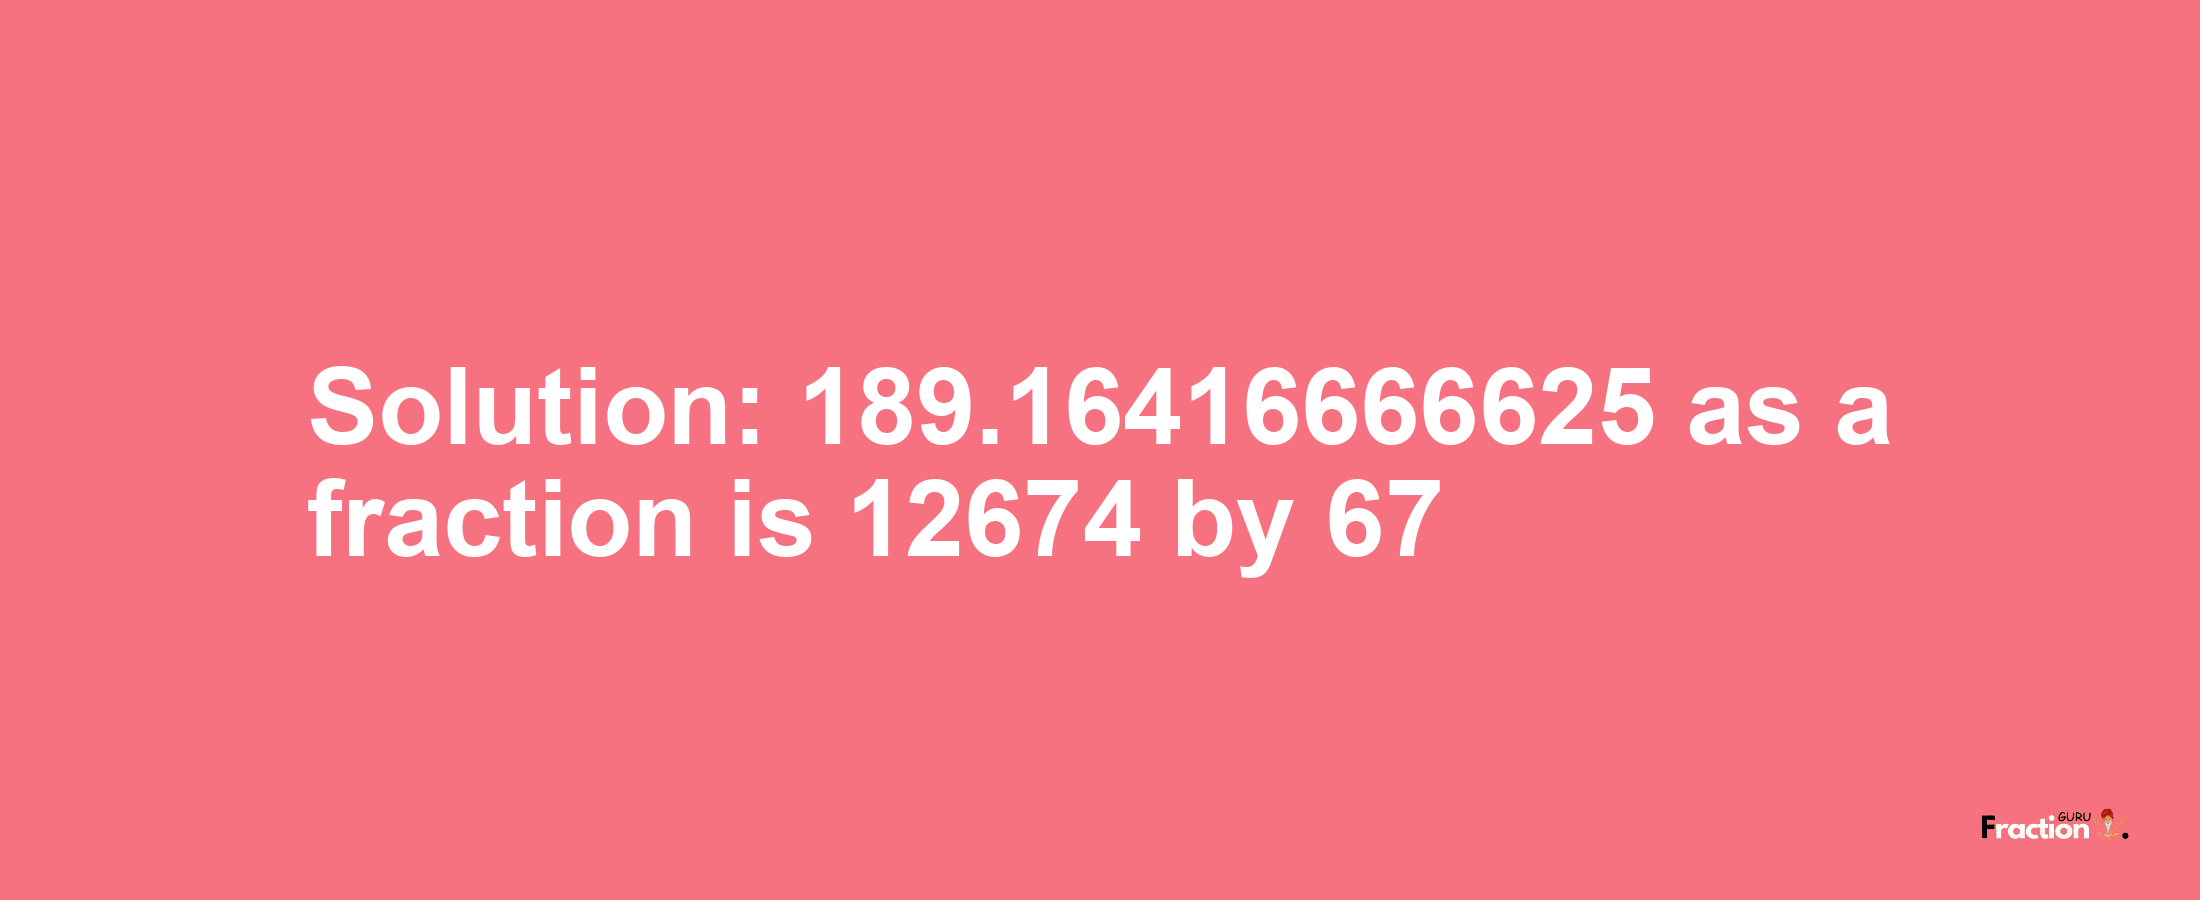 Solution:189.16416666625 as a fraction is 12674/67